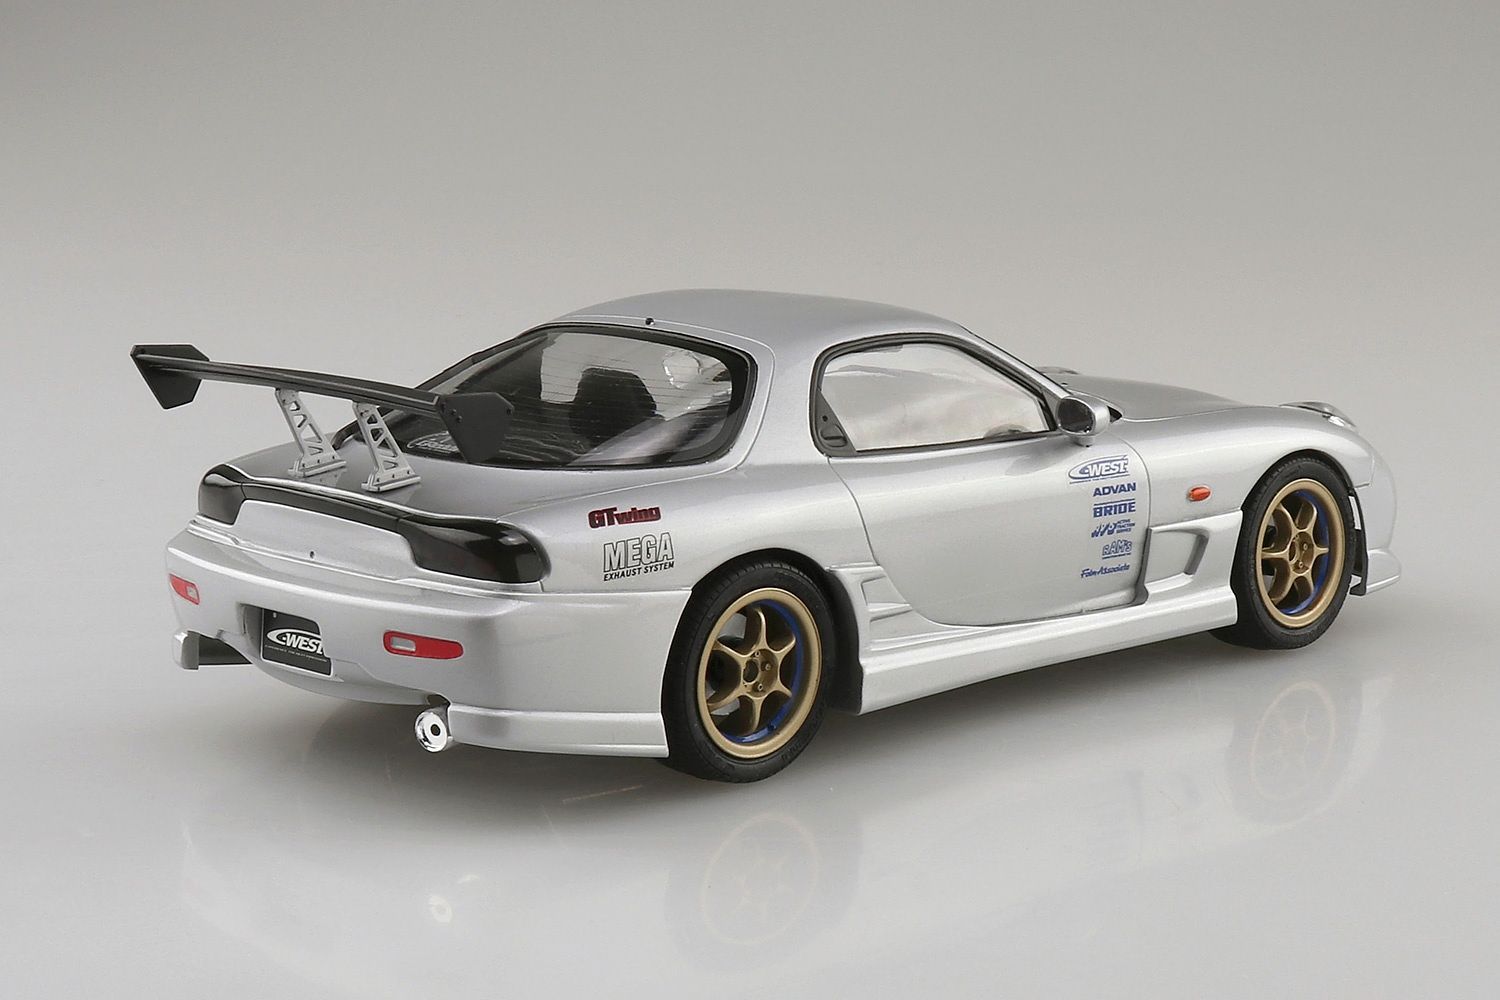 Aoshima 1/24 Mazda RD3S RX-7 C-West '99 06302 – Burbank's House of 